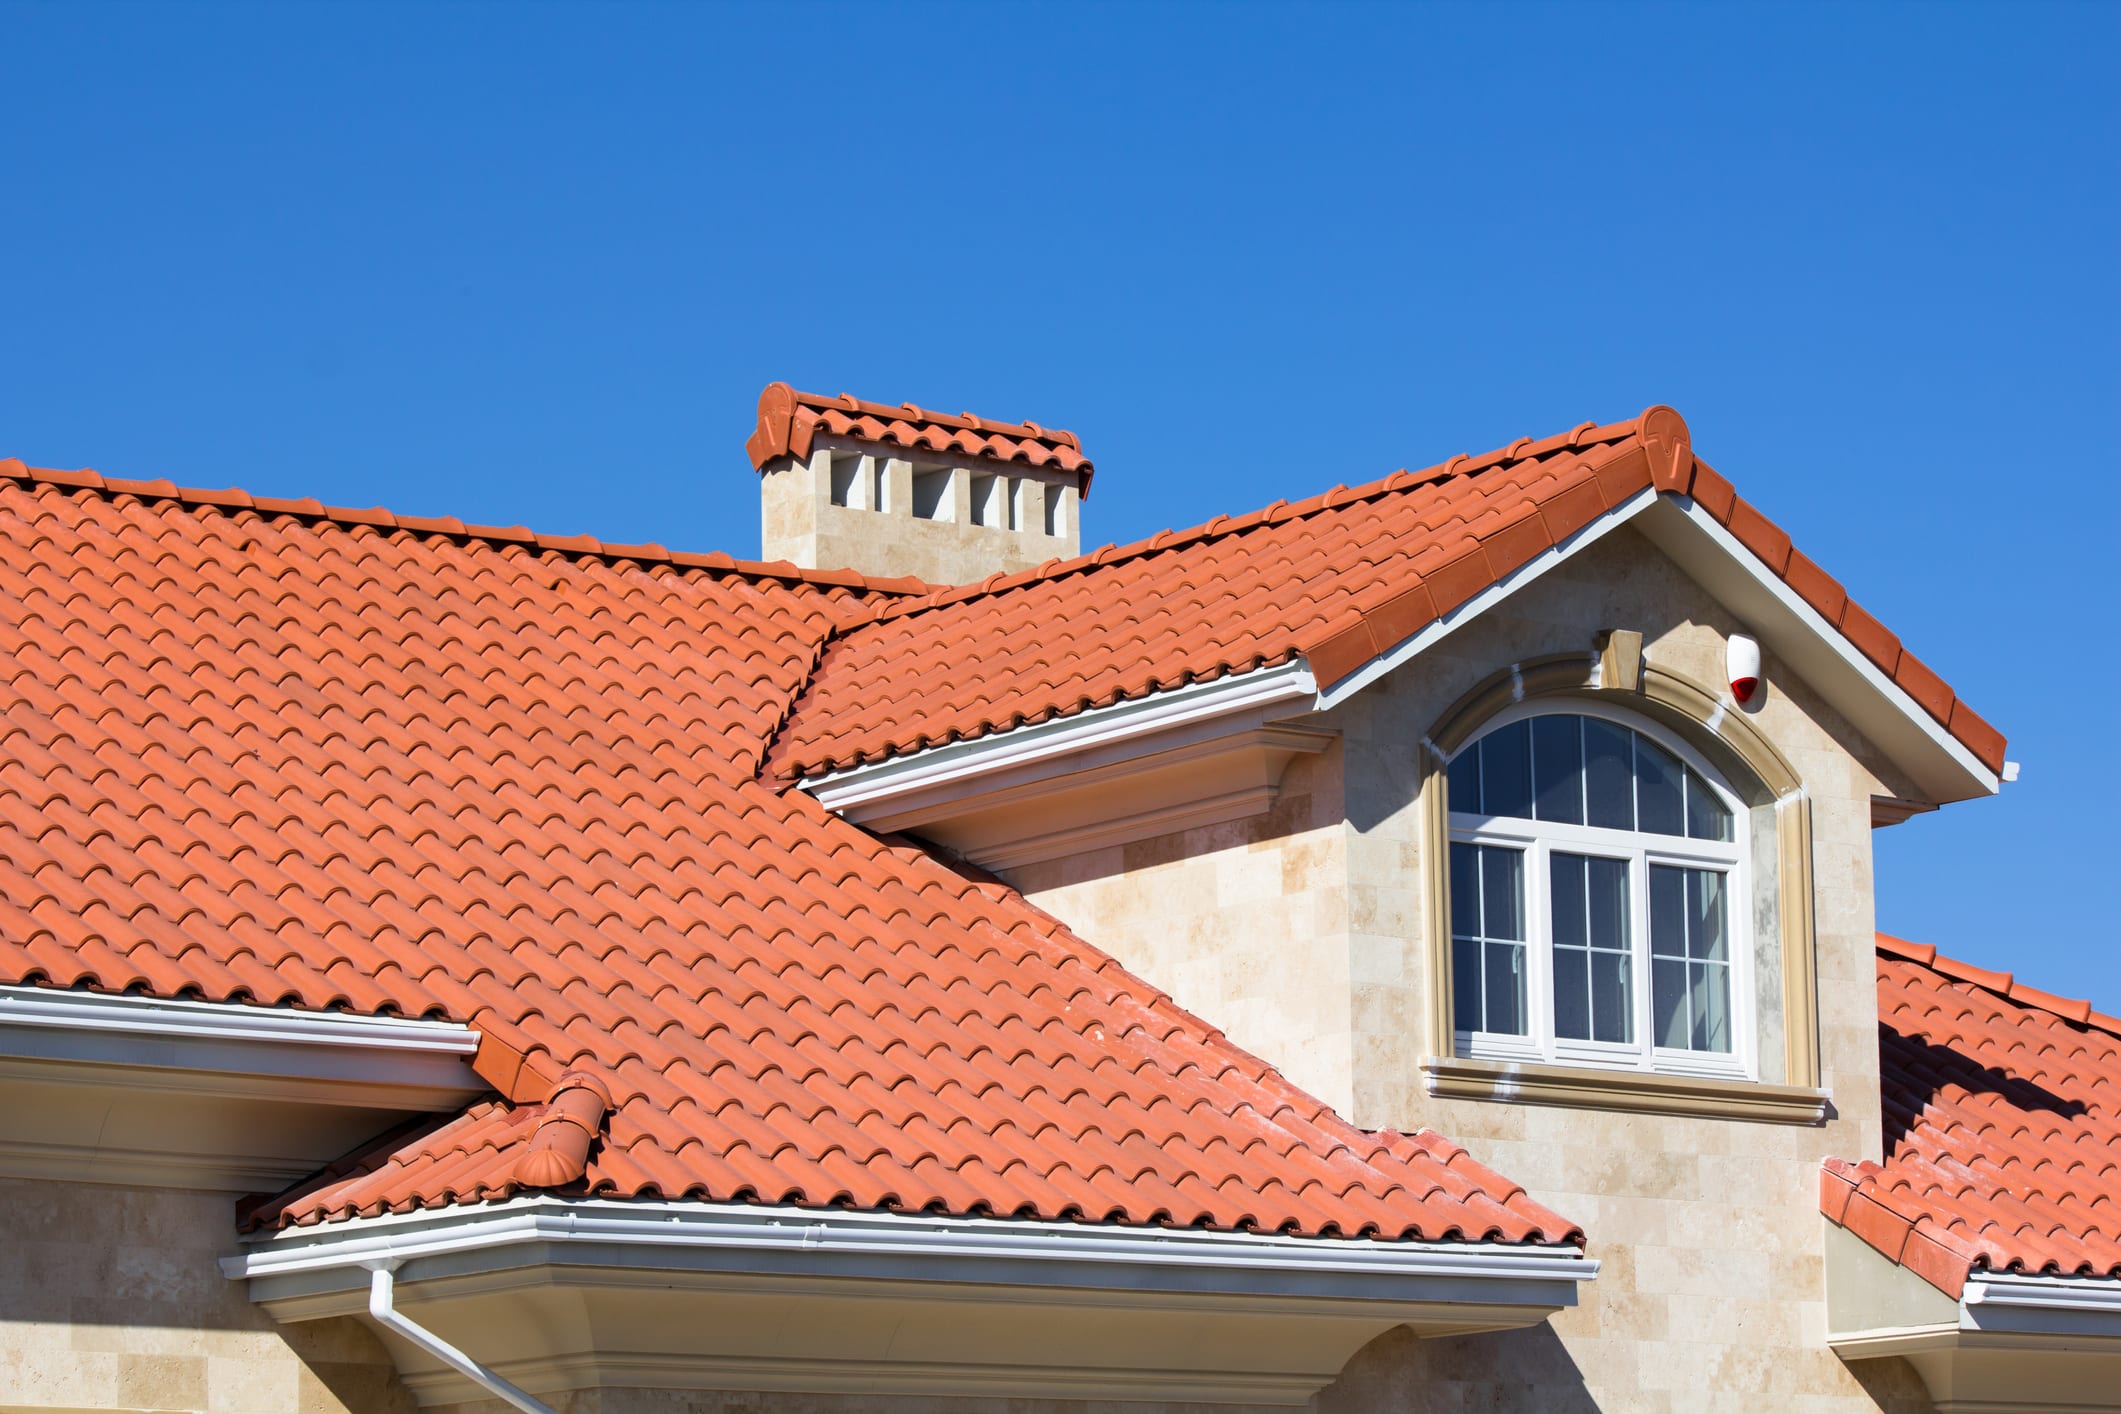 Red Tiled Ceramic Roof On House